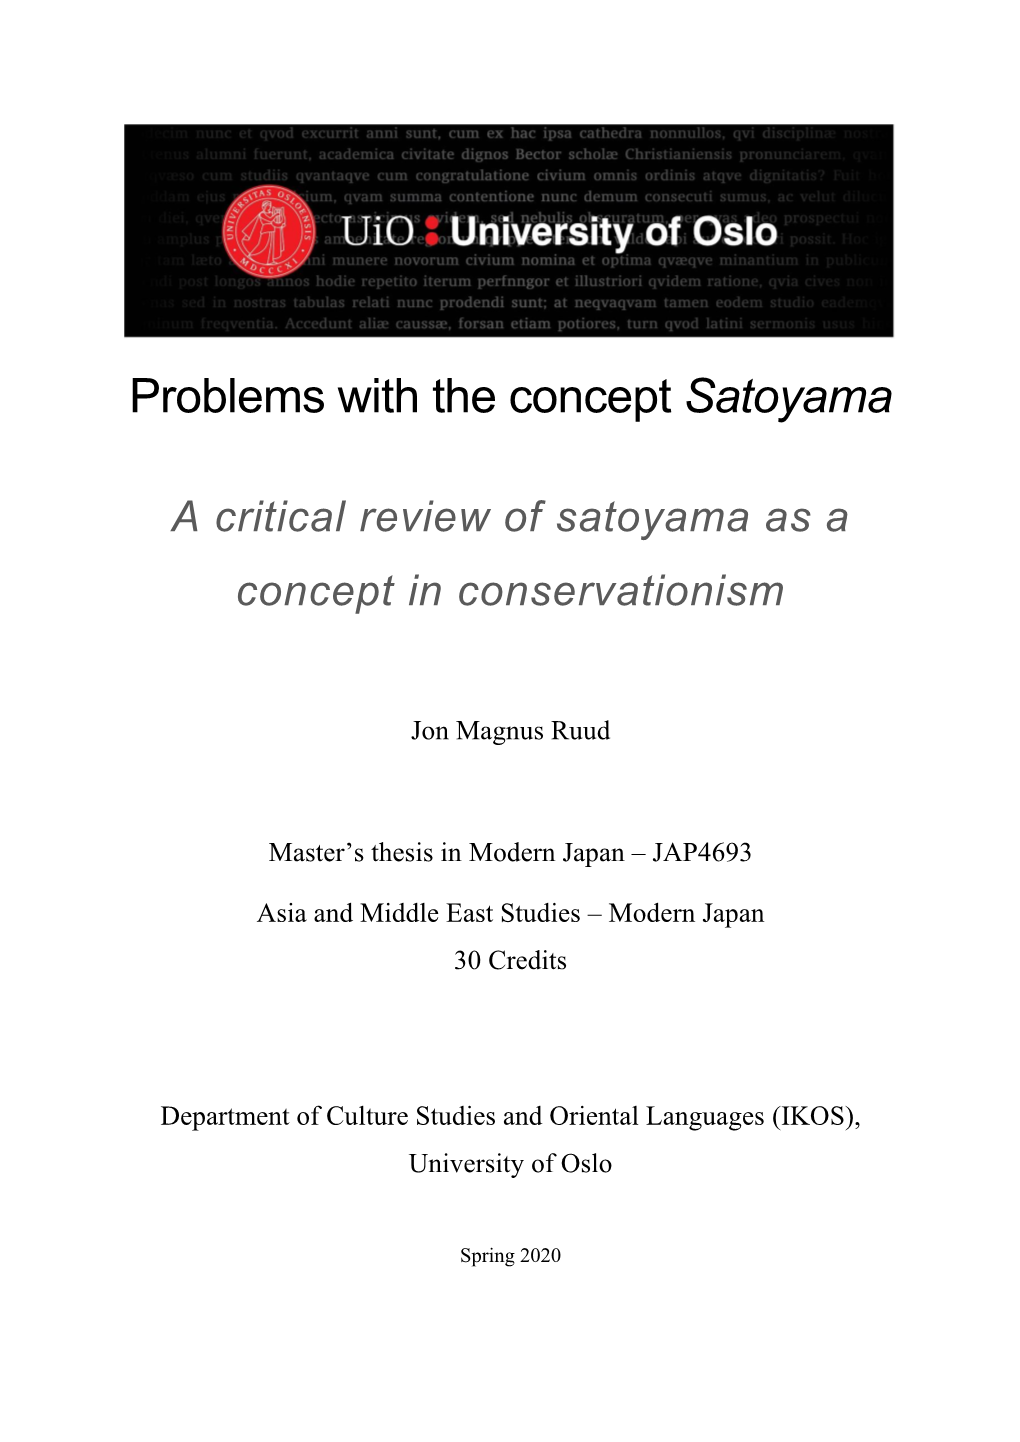 Problems with the Concept Satoyama